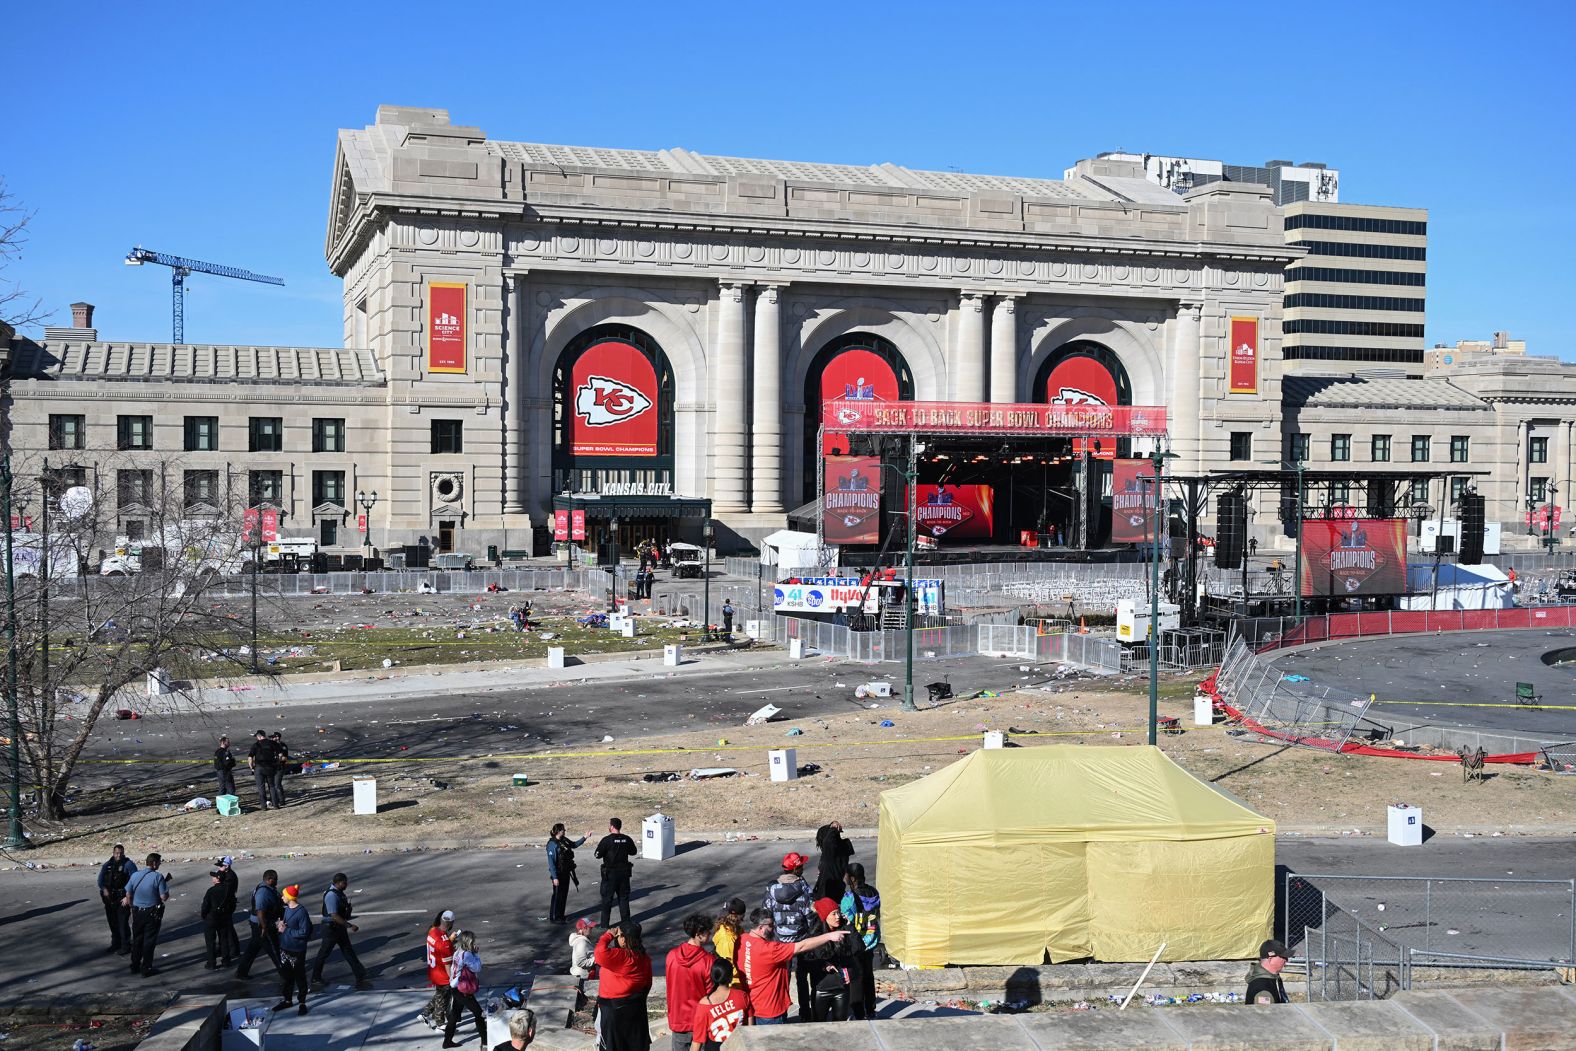 A view of the Union Station area following the shooting.